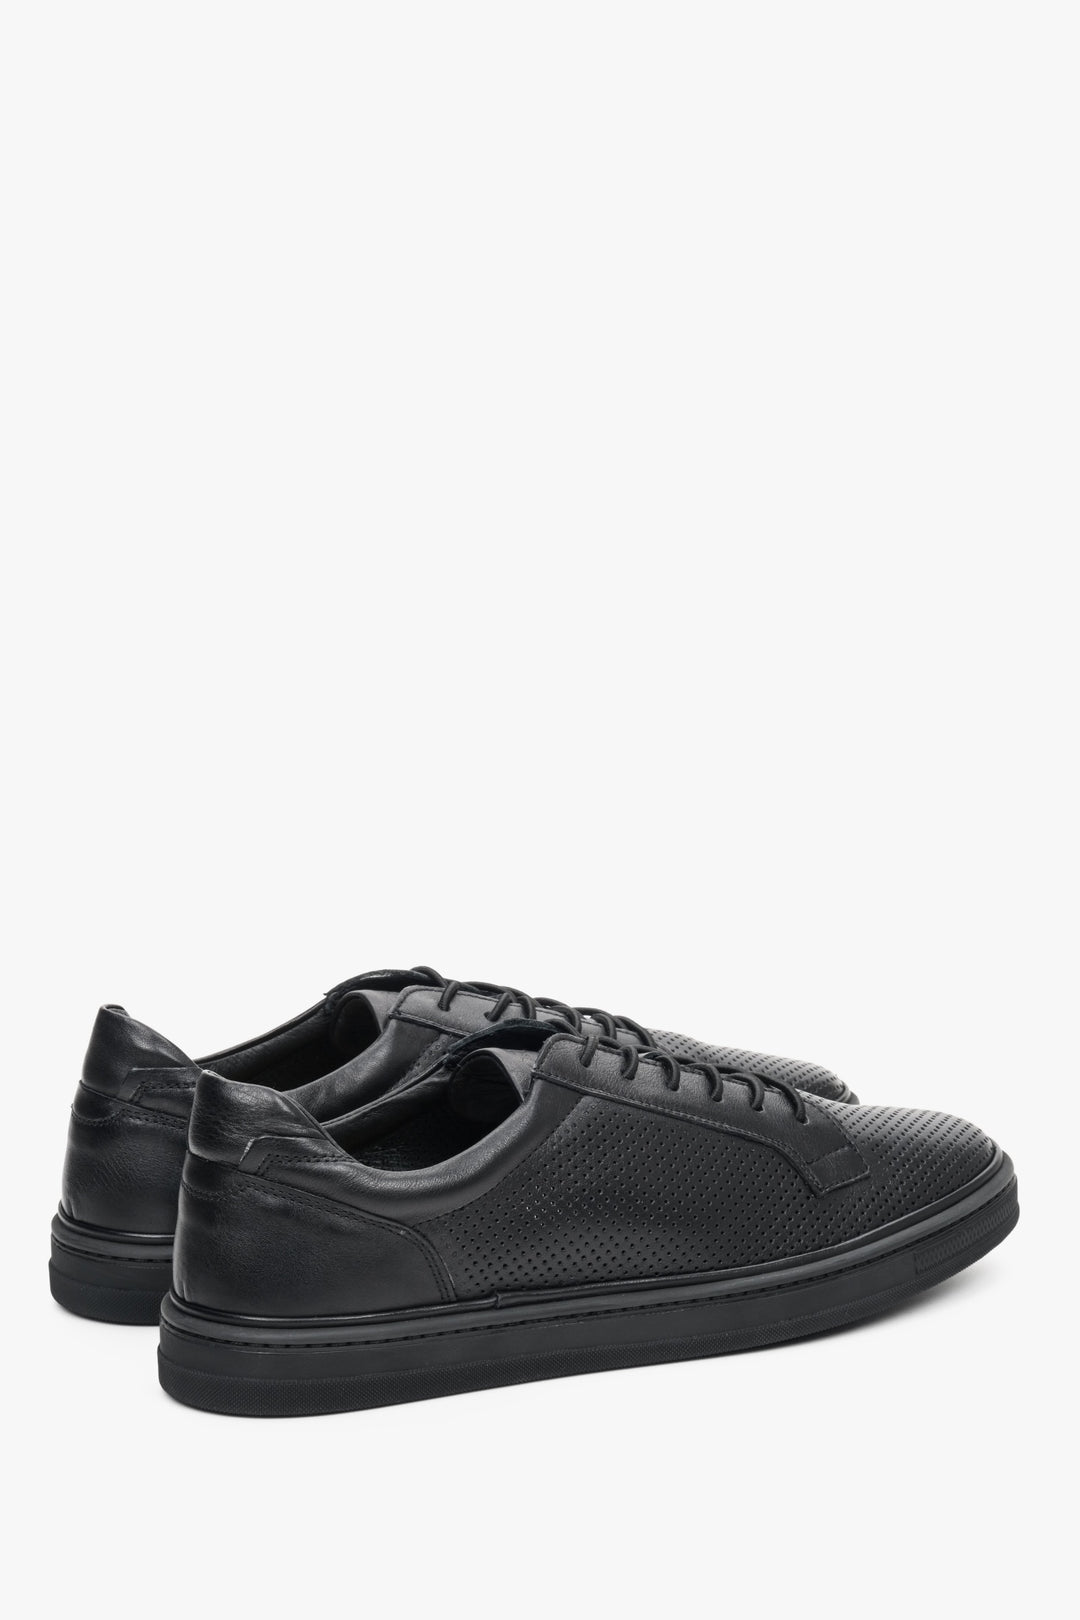 Black men's natural leather sneakers for summer with perforations - close-up on the sideline of the shoe.